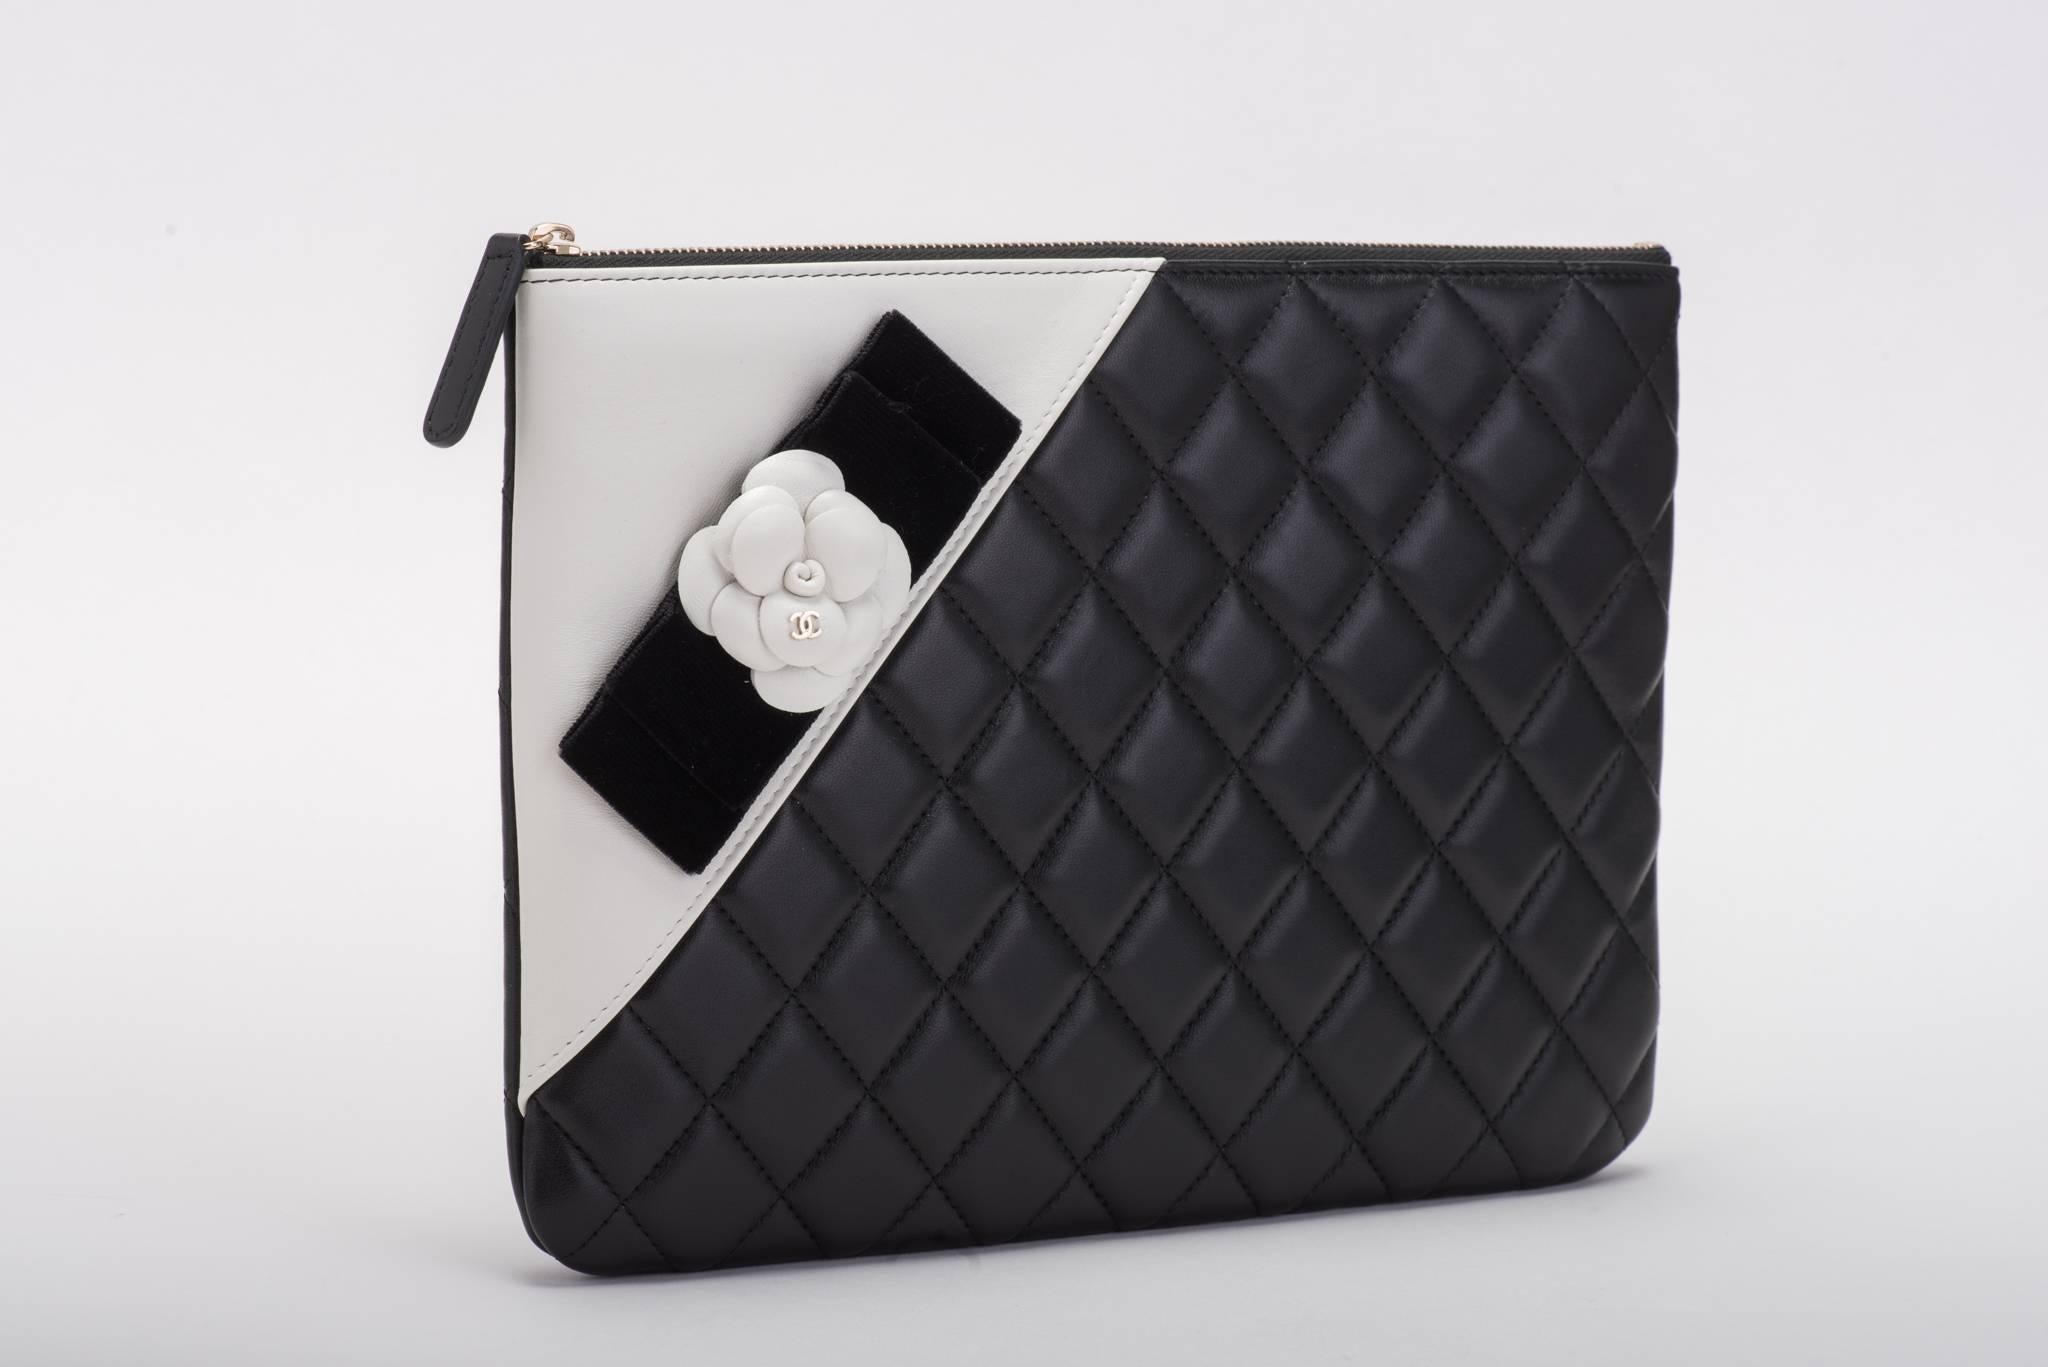 Chanel brand new in box timeless black and white quilted camellia clutch. Signature logo camellia with black velvet ribbon. Comes with hologram, ID card, booklet, box and ribbon.